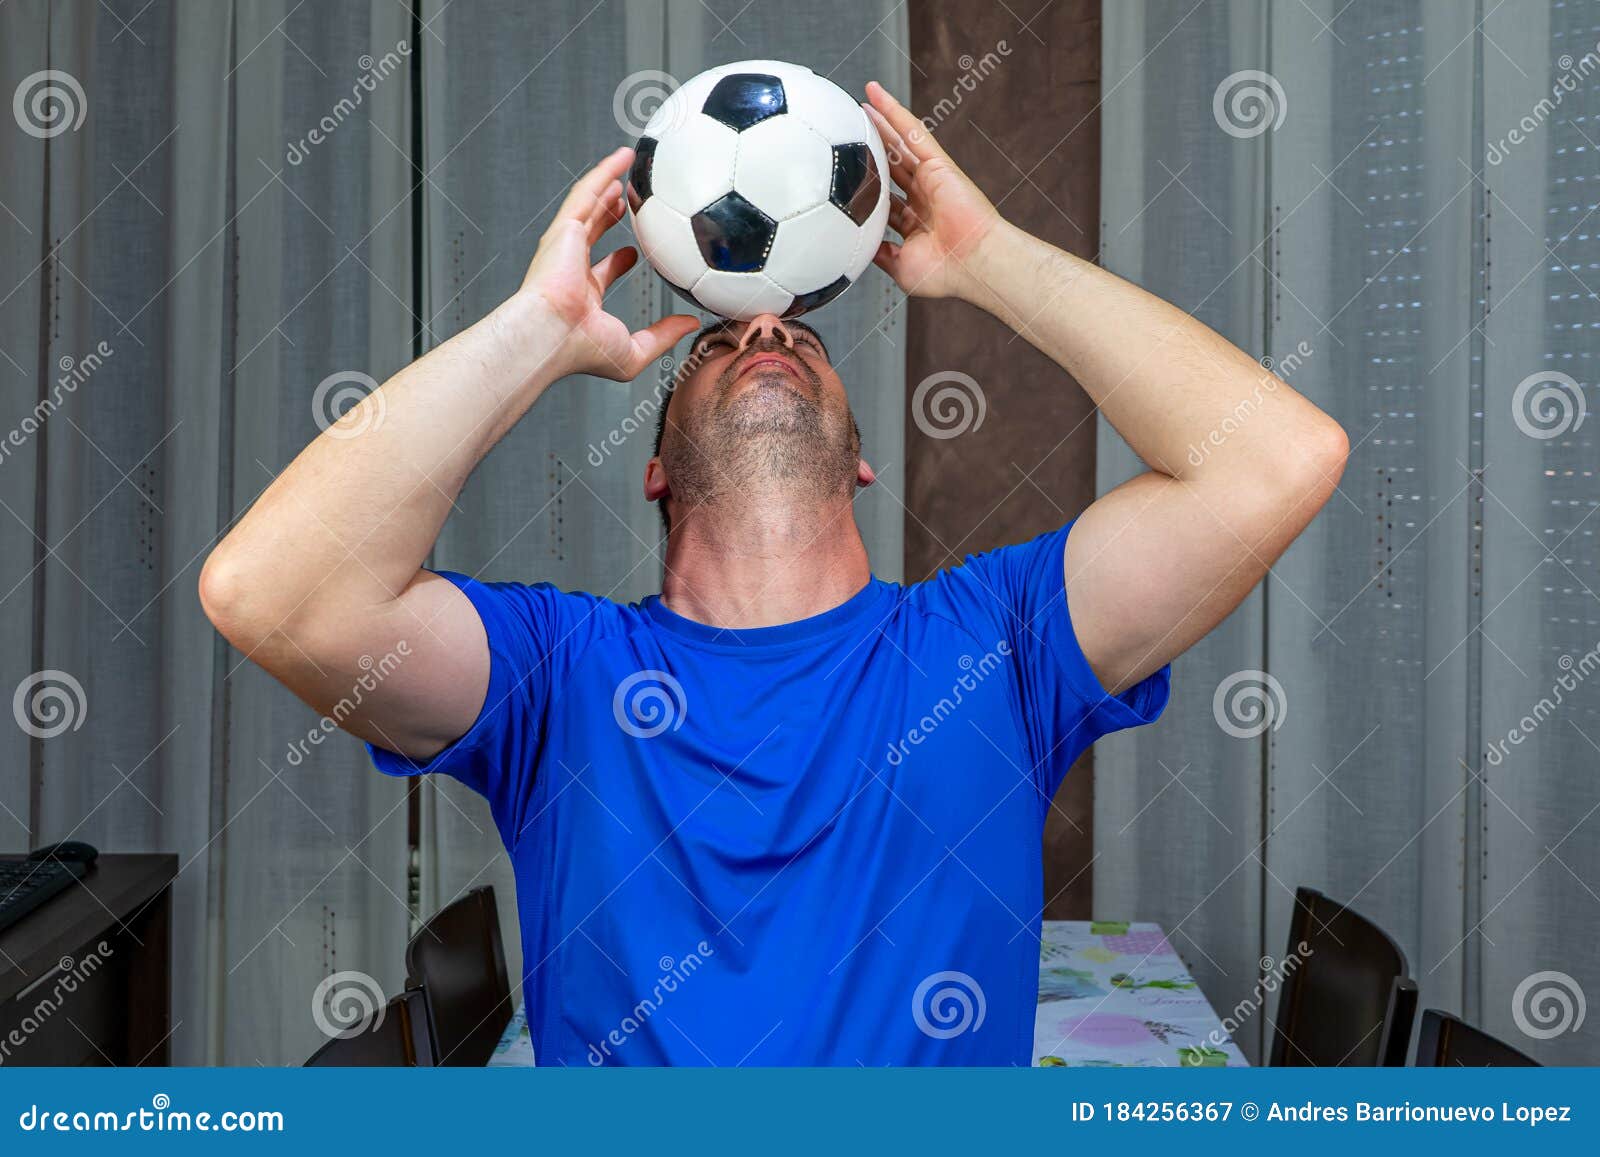 Man with a Beard and Short Hair in a Blue Shirt Trying To Control a Soccer  Ball with His Head Stock Image - Image of person, control: 184256367